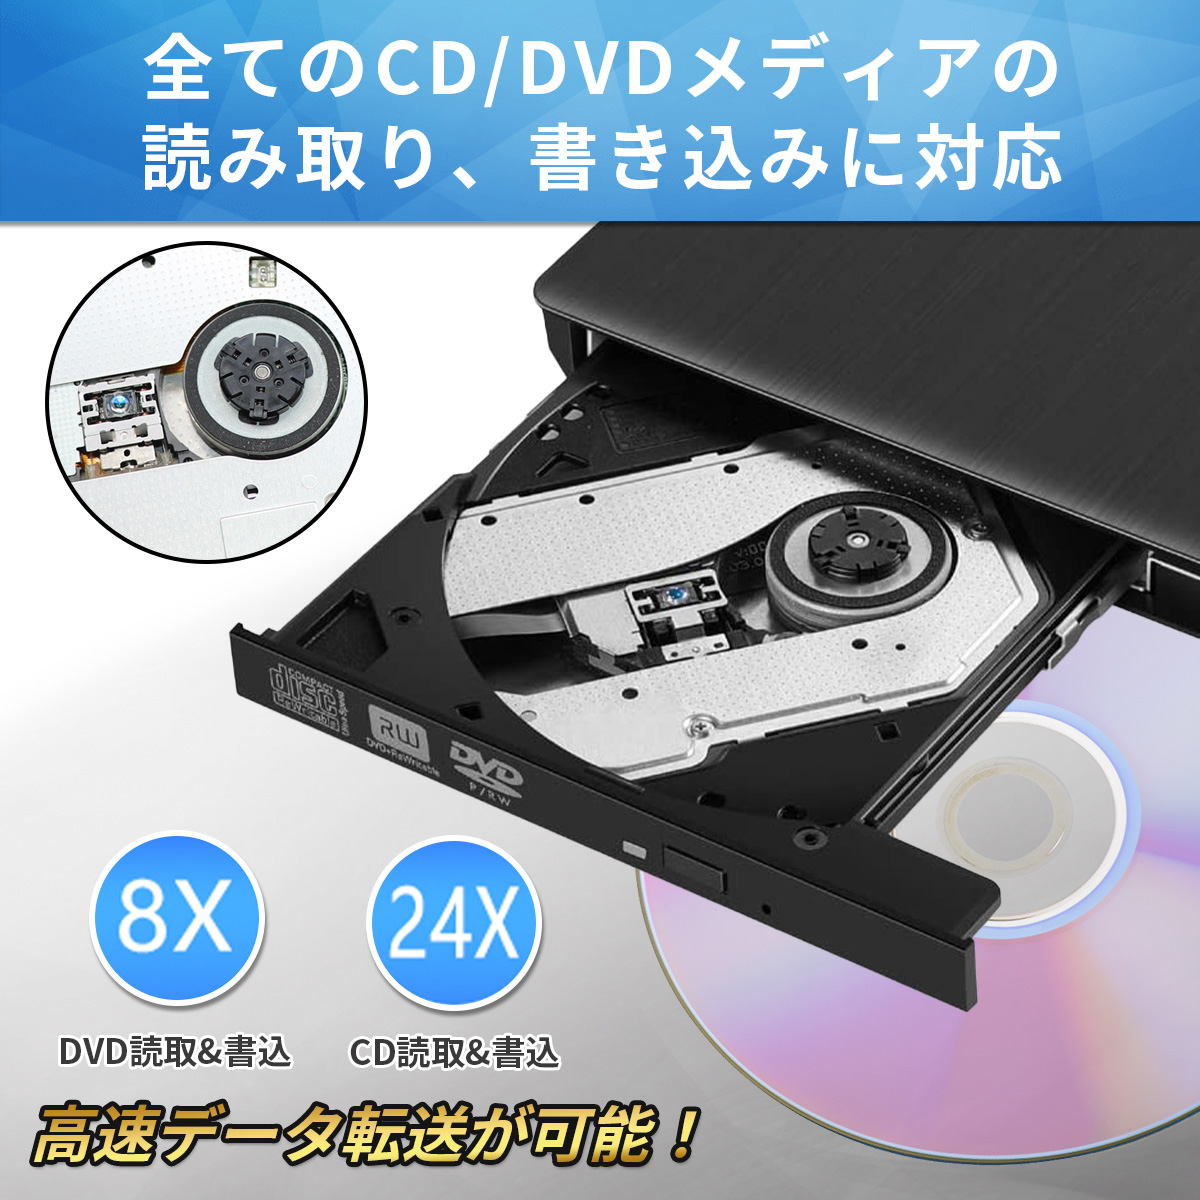 60 days guarantee attached outside DVD Drive USB3.0 type-c portable Drive CD/DVD player CD/DVD Drive quiet sound high speed light weight slim compact CD/DVD readout * writing 